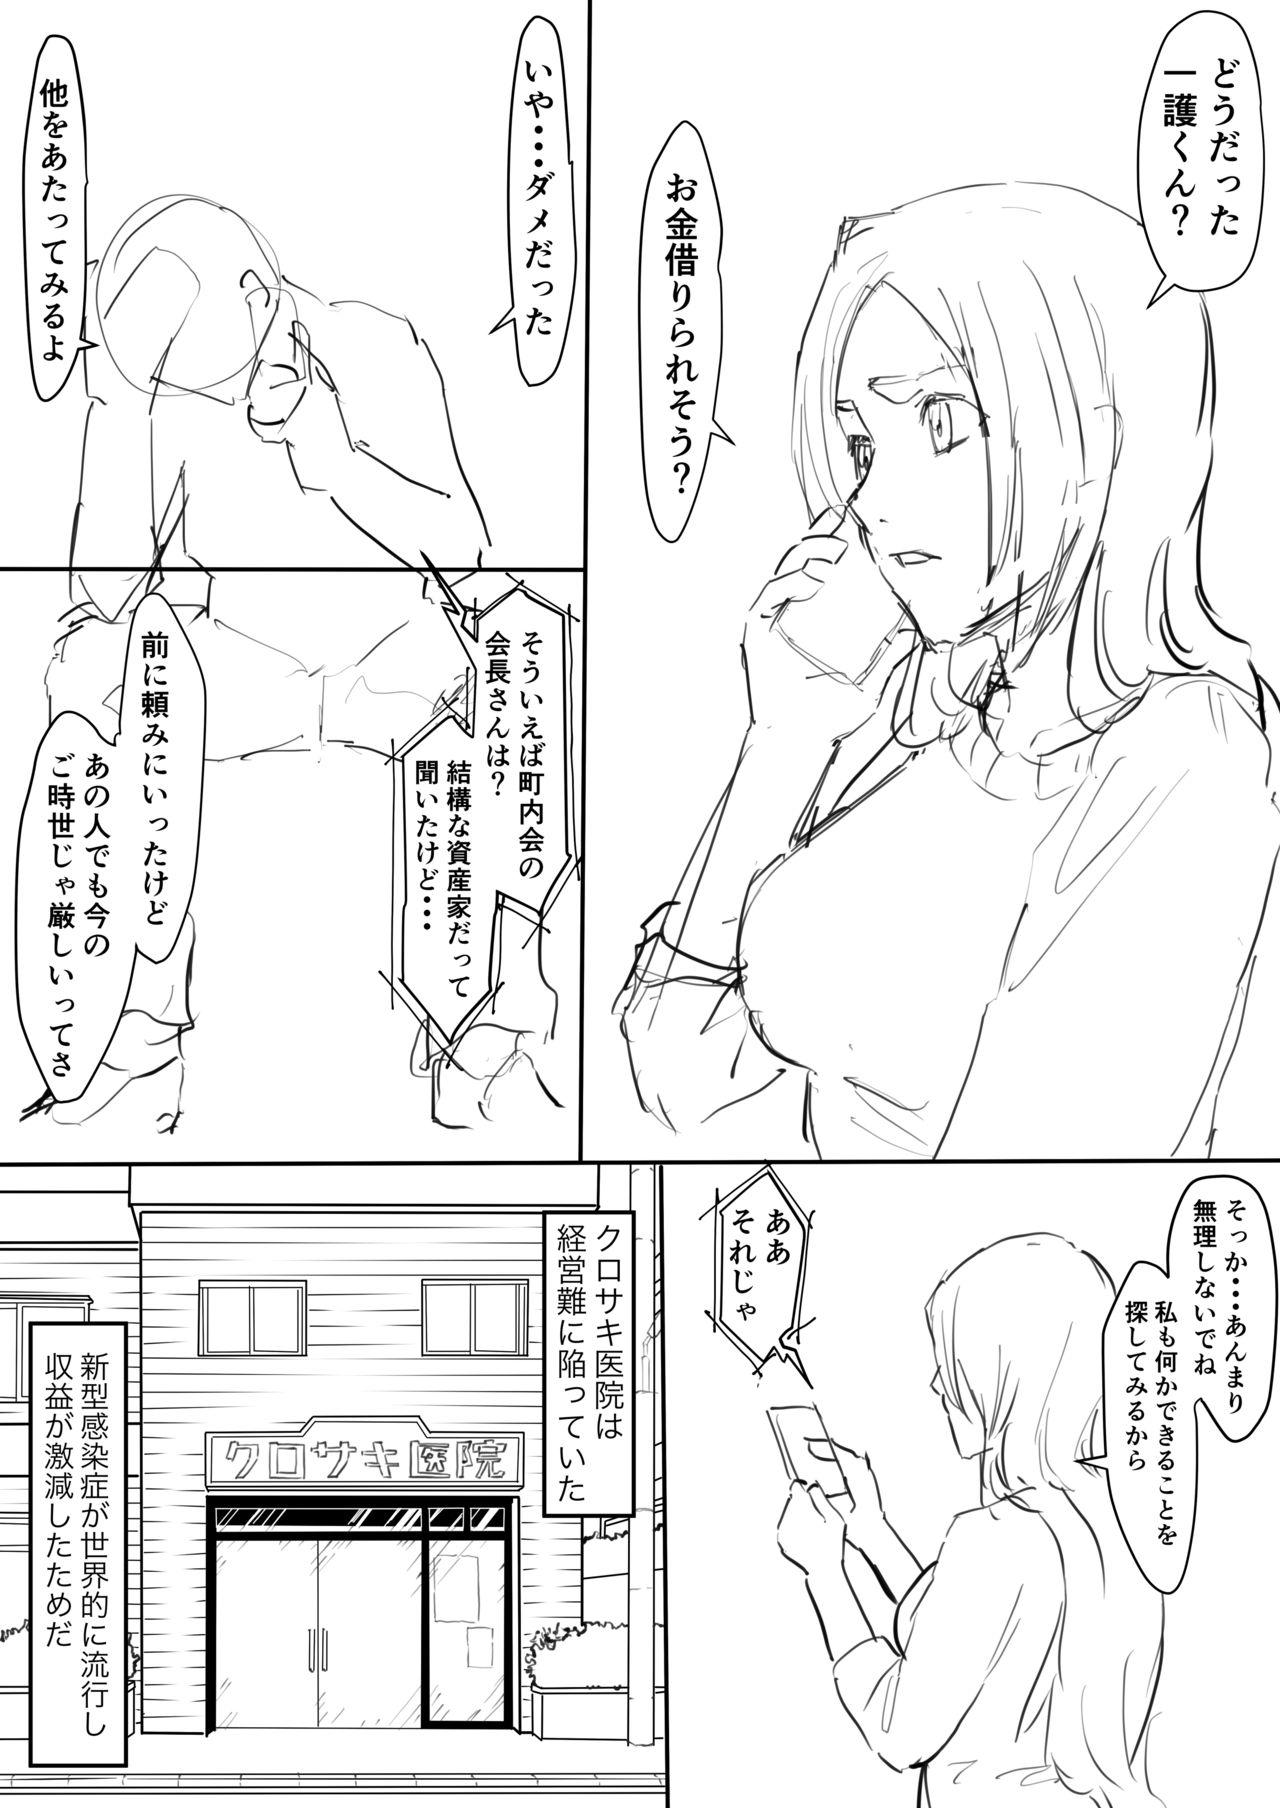 Naked Sluts Orihime Manga Updated 7/2022 - Bleach Stroking - Picture 1